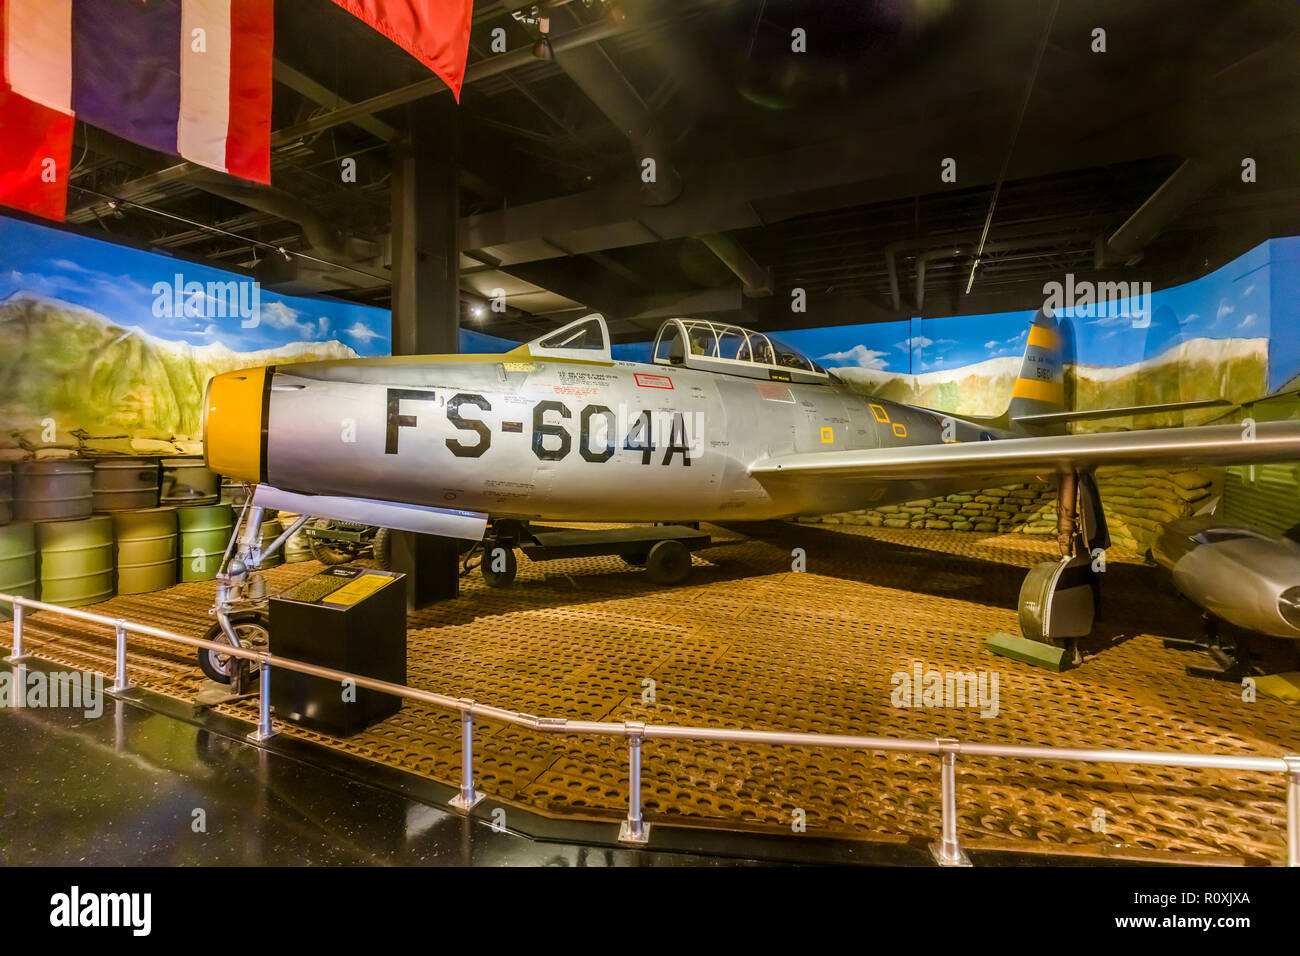 The Museum of Aviation also home of Georgia Aviation Hall of Fame at  Robins Air Force Base in Warner Robins, Georgia, United States Stock Photo